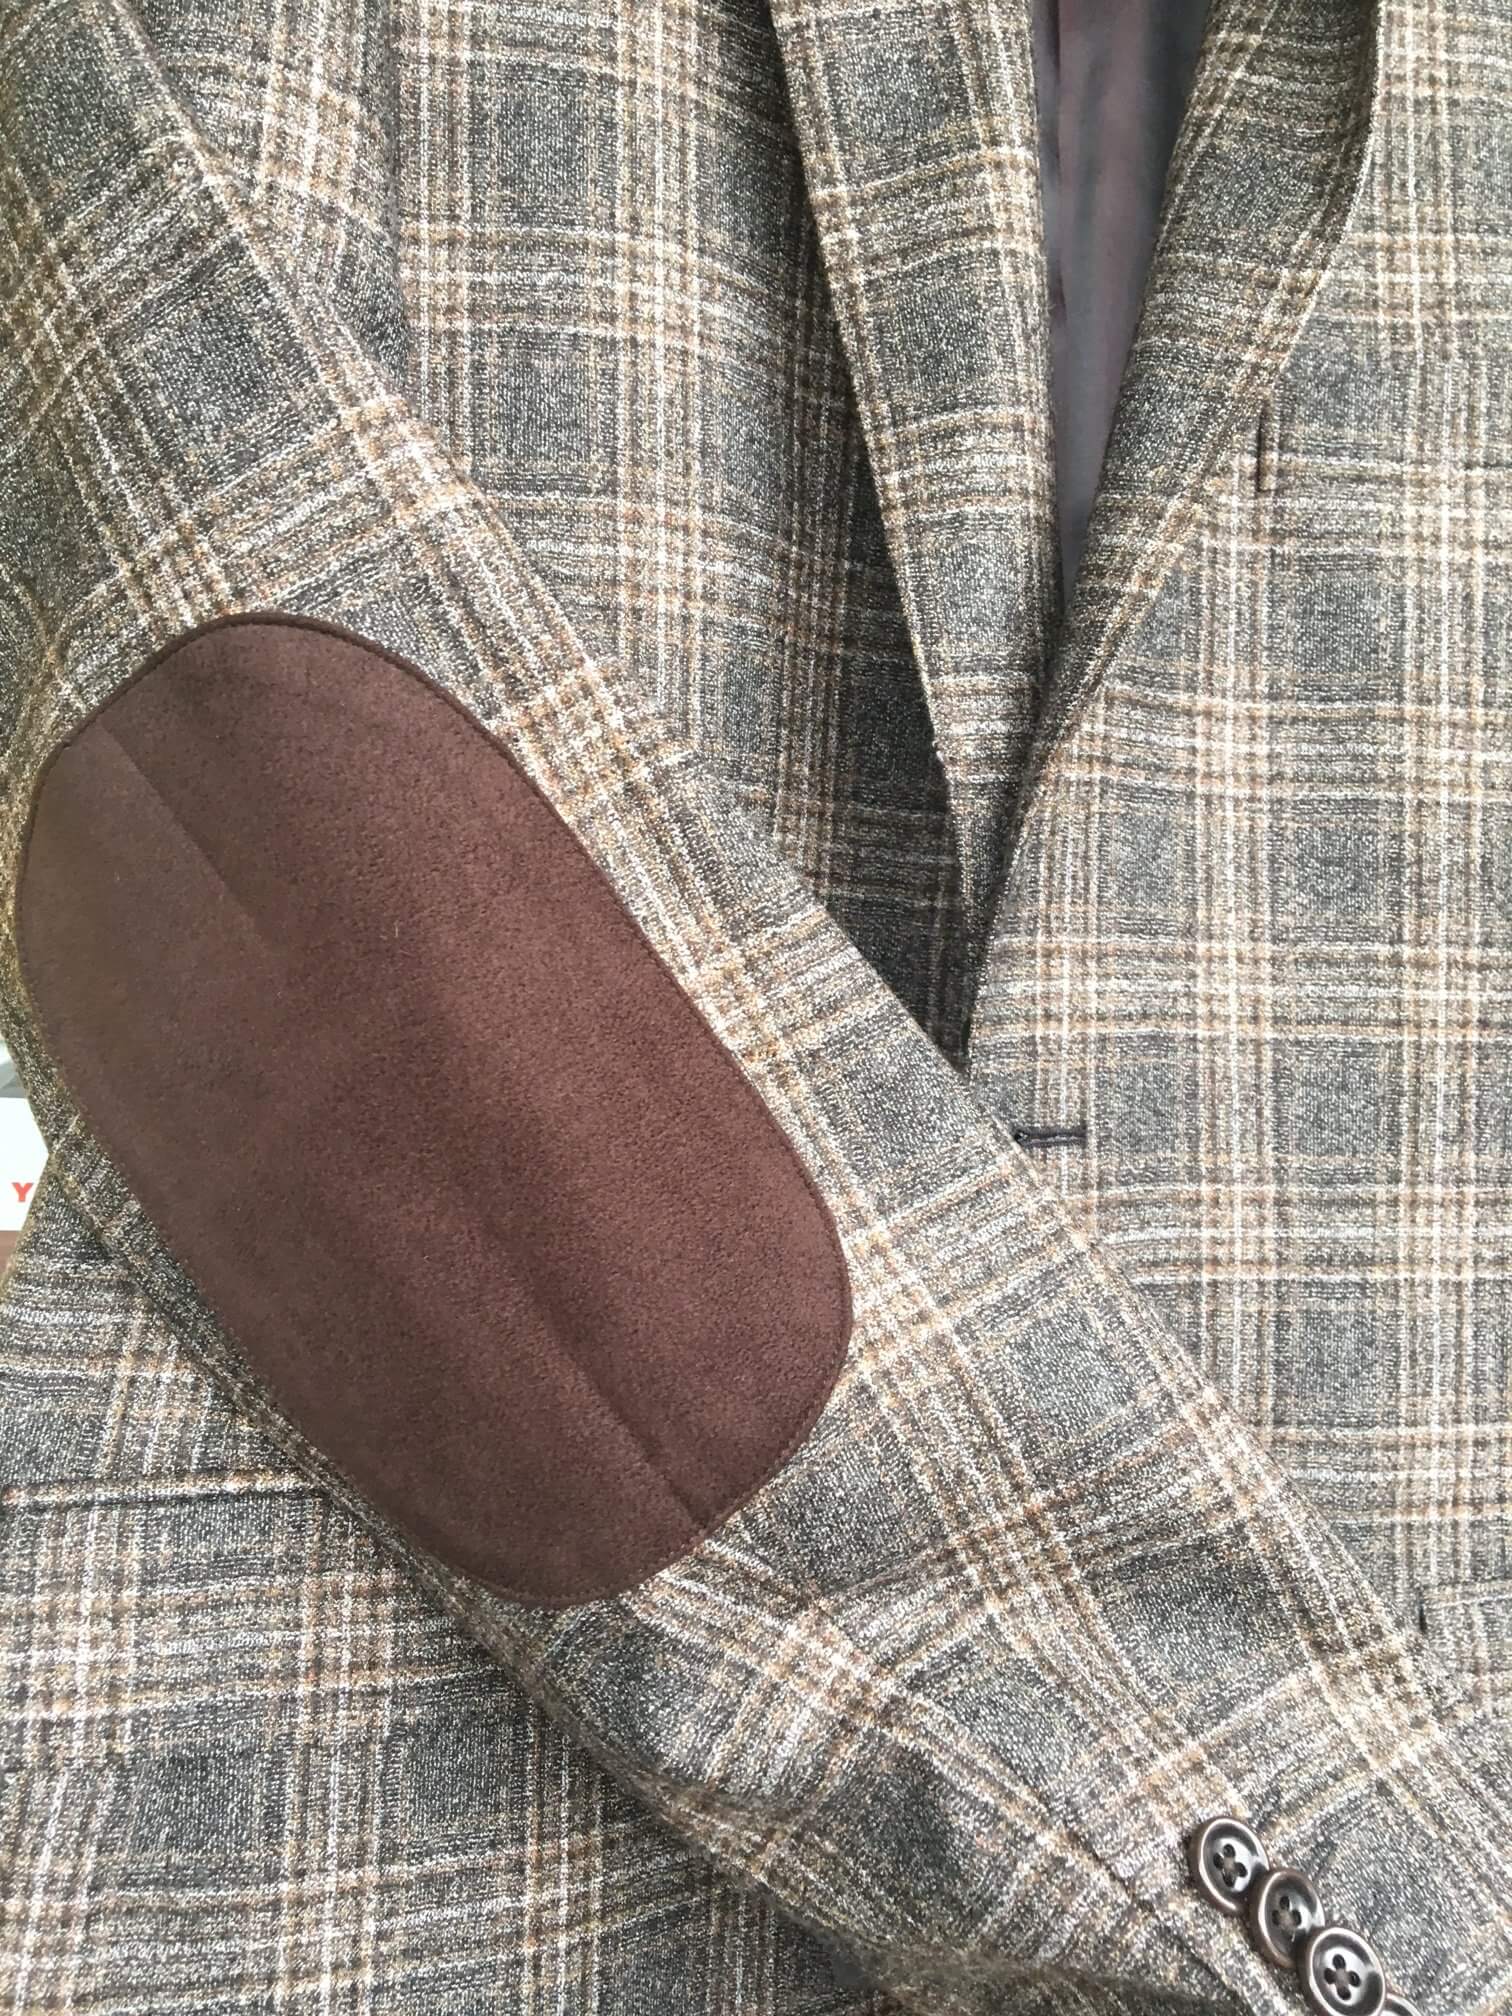 Tweed coat with leather elbow patches.